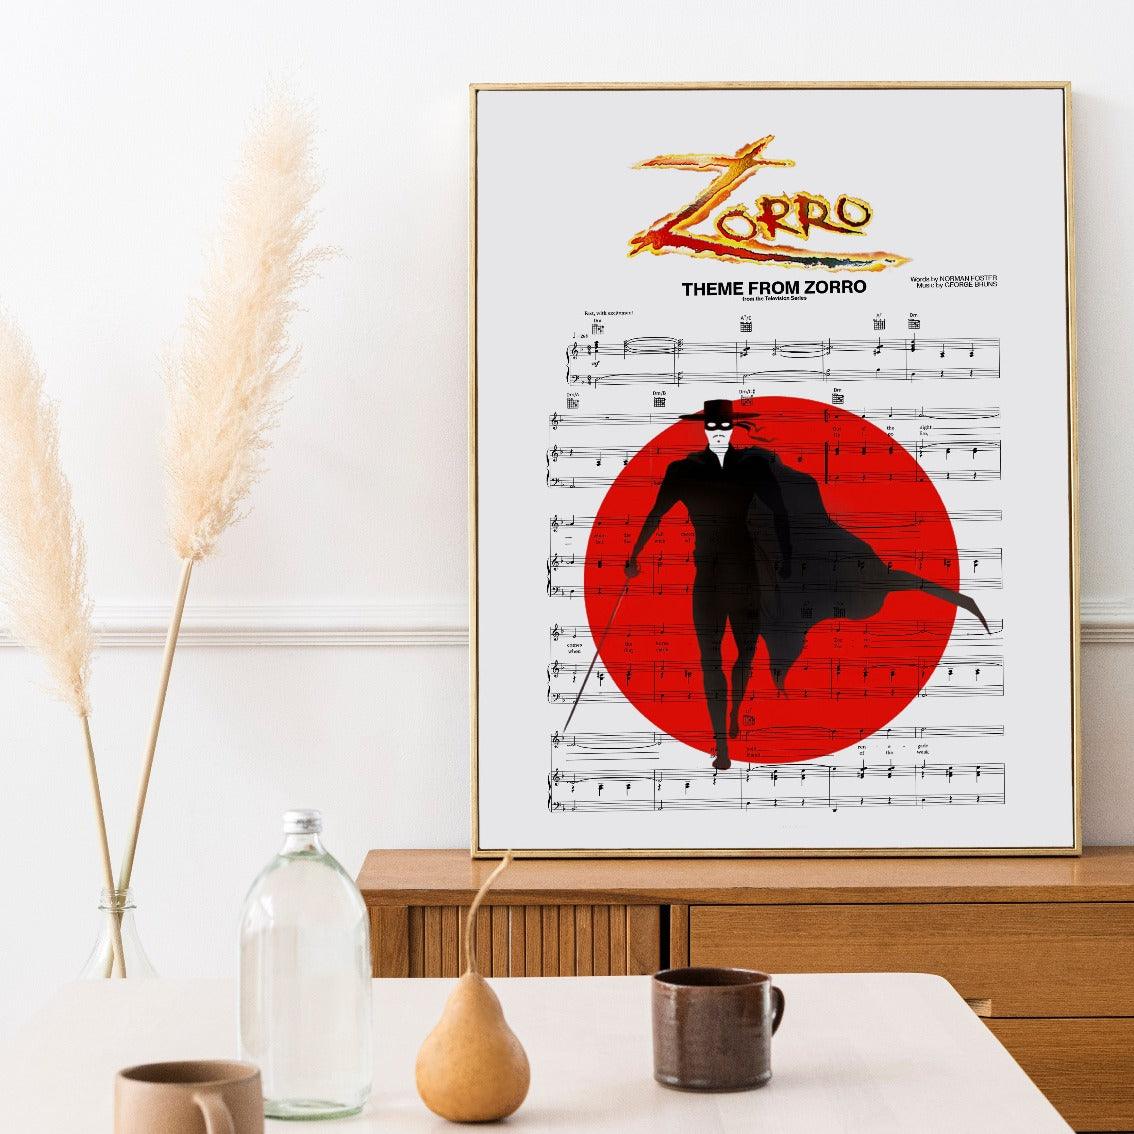 98Types Music is proud to offer this one-of-a-kind, hand-crafted Zorro Theme Poster. This poster is the perfect addition to your home décor, and would make a great gift for any music lover. It features the lyrics to the song "Zorro" by Movies Sweet Music, and is designed and hand-crafted by the team at 98Types Music. Add some music to your life with this gorgeous Zorro Theme Poster.